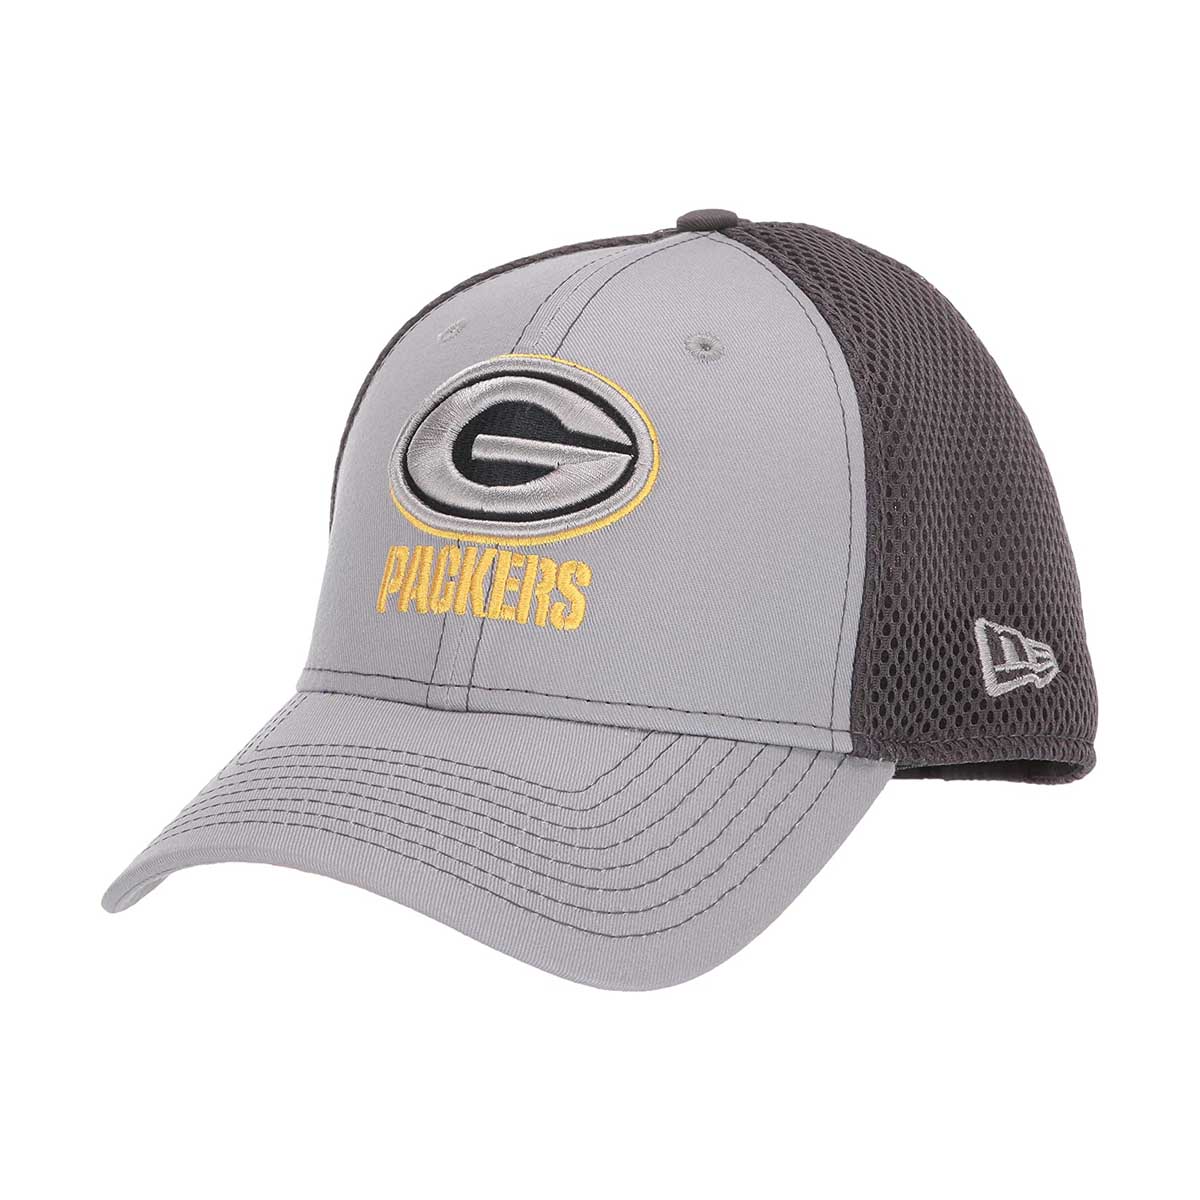 grey packers hat